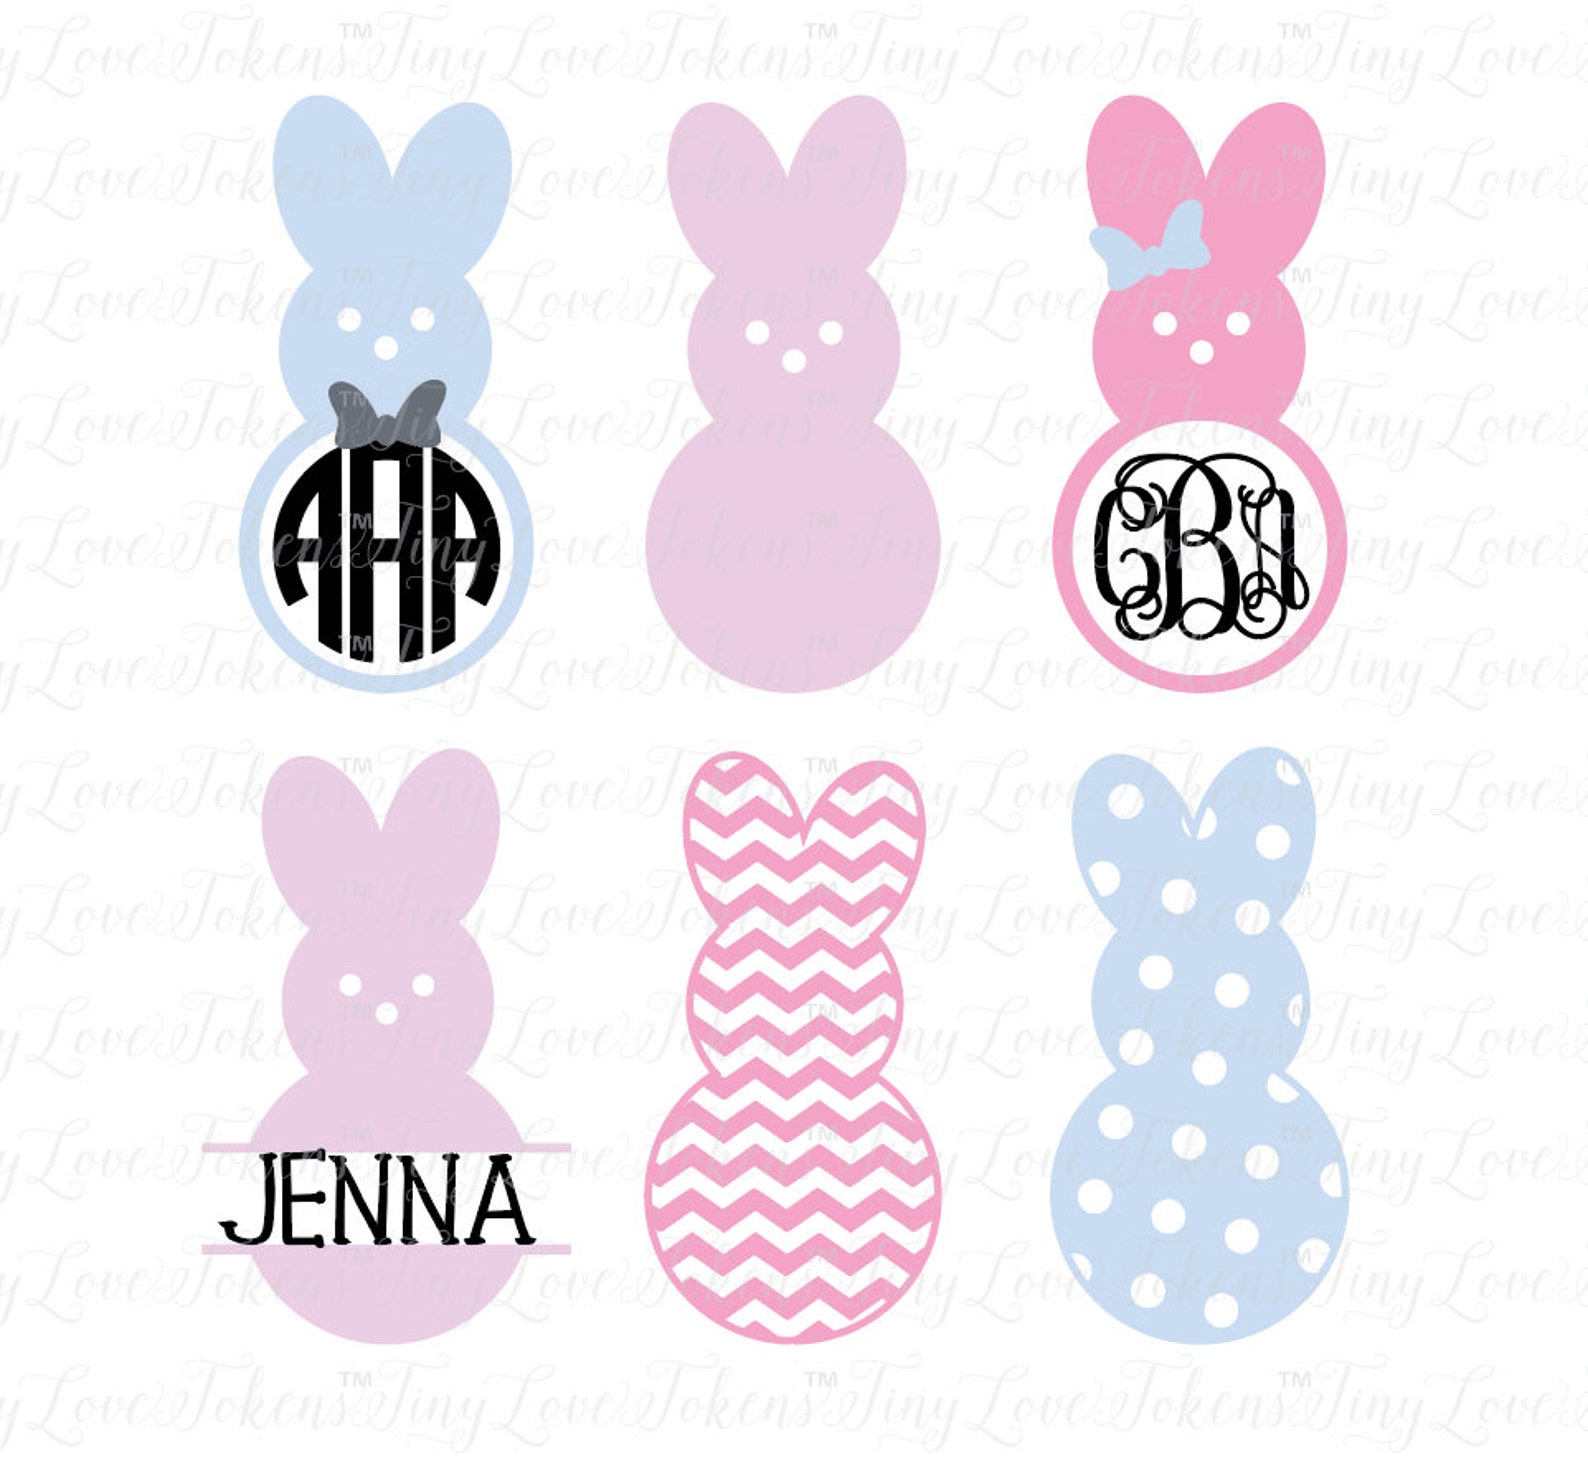 Peeps Monogram SVG Design for Silhouette and Other Craft | Etsy